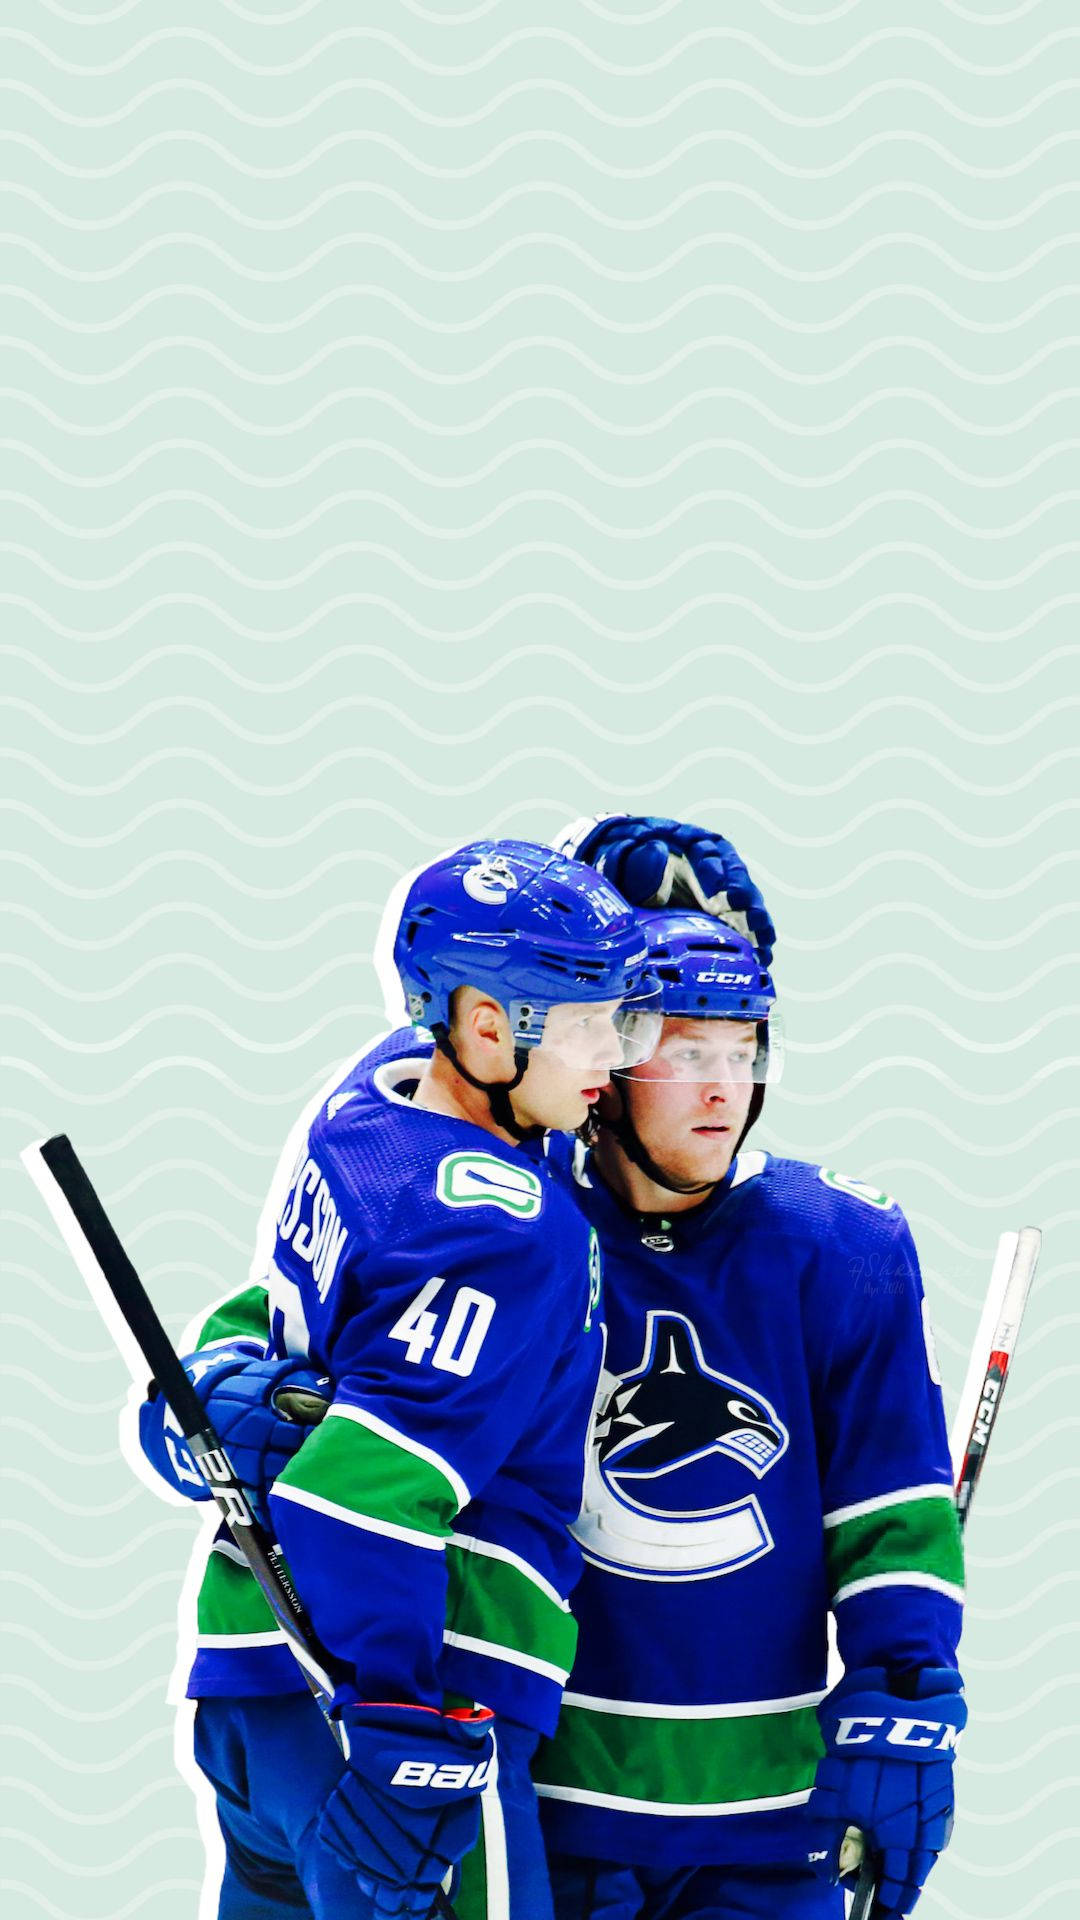 Best Hockey player Henrik Sedin wallpapers and images - wallpapers